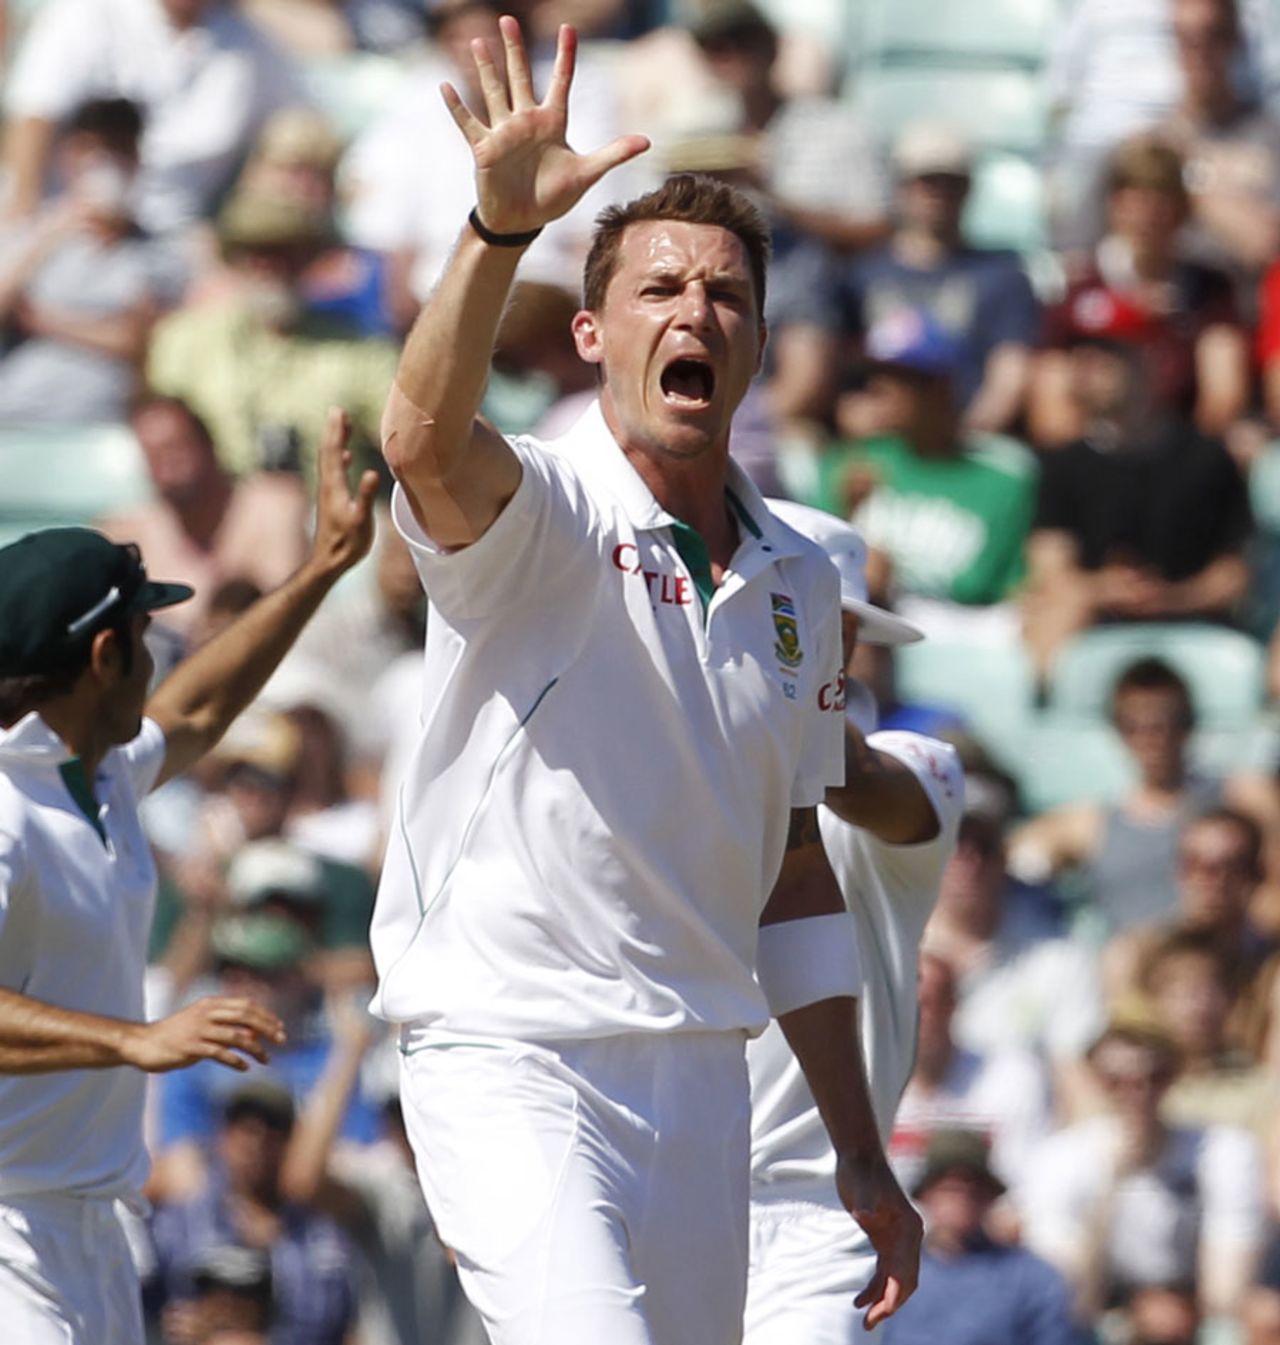 Dale Steyn signals his five-for to the crowd, England v South Africa, 1st Test, The Oval, 5th Day, July, 23, 2012